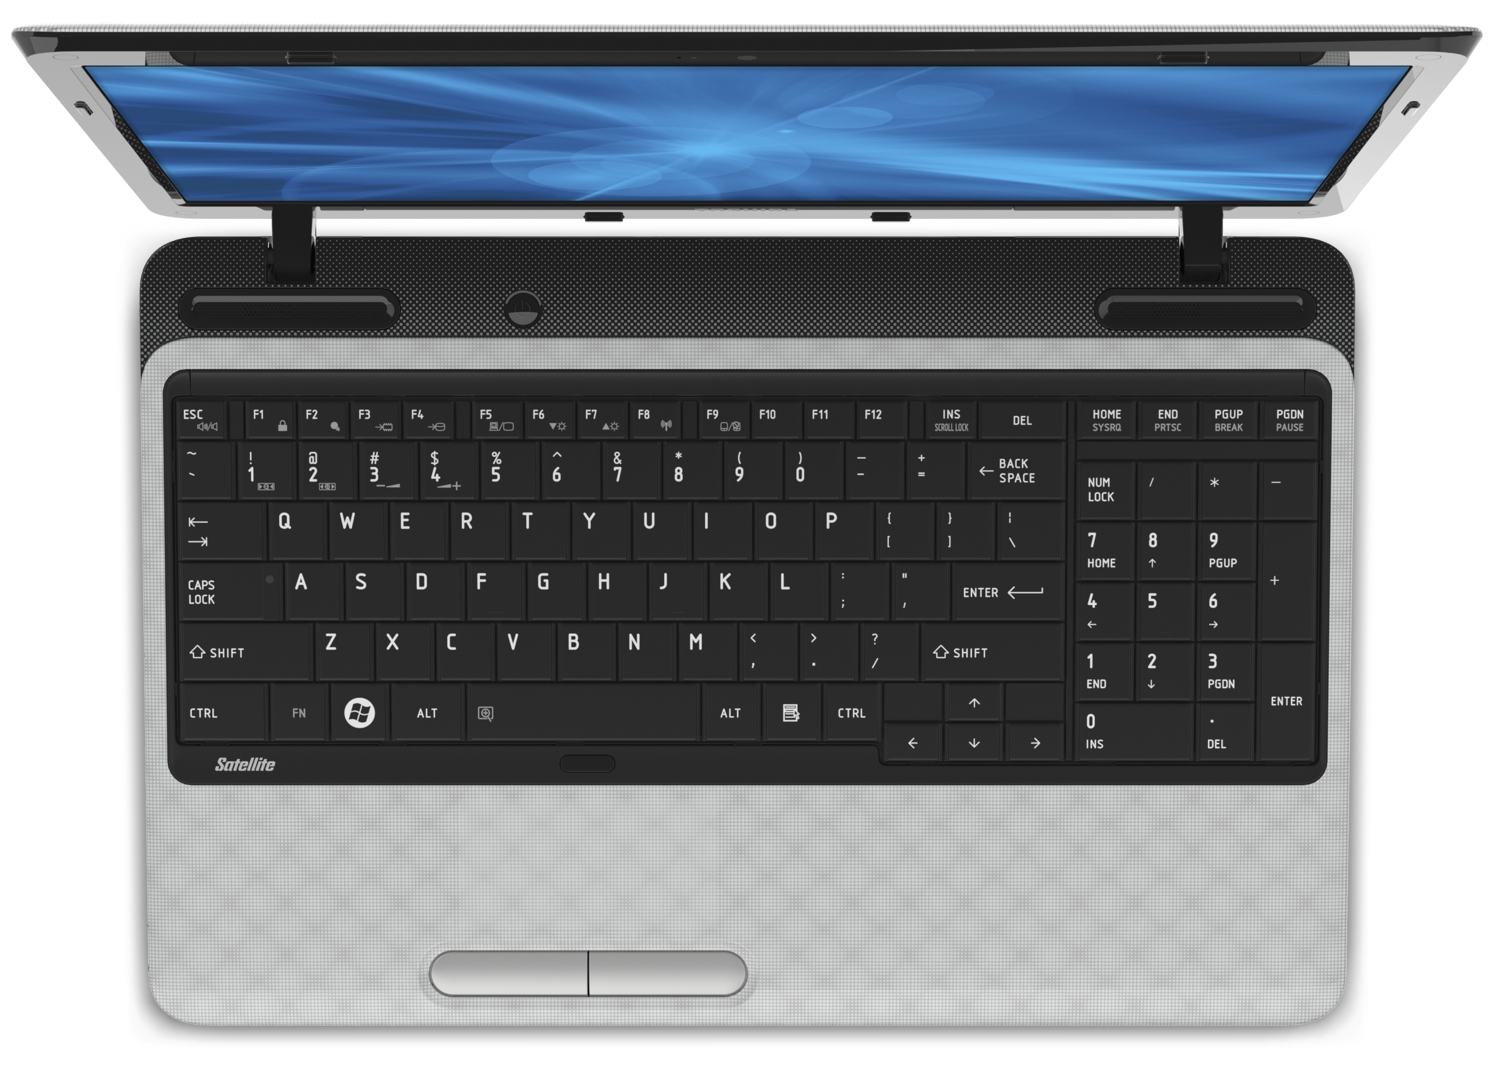 http://thetechjournal.com/wp-content/uploads/images/1111/1321885178-toshiba-satellite-l755s5349-156inch-led-laptop--4.jpg